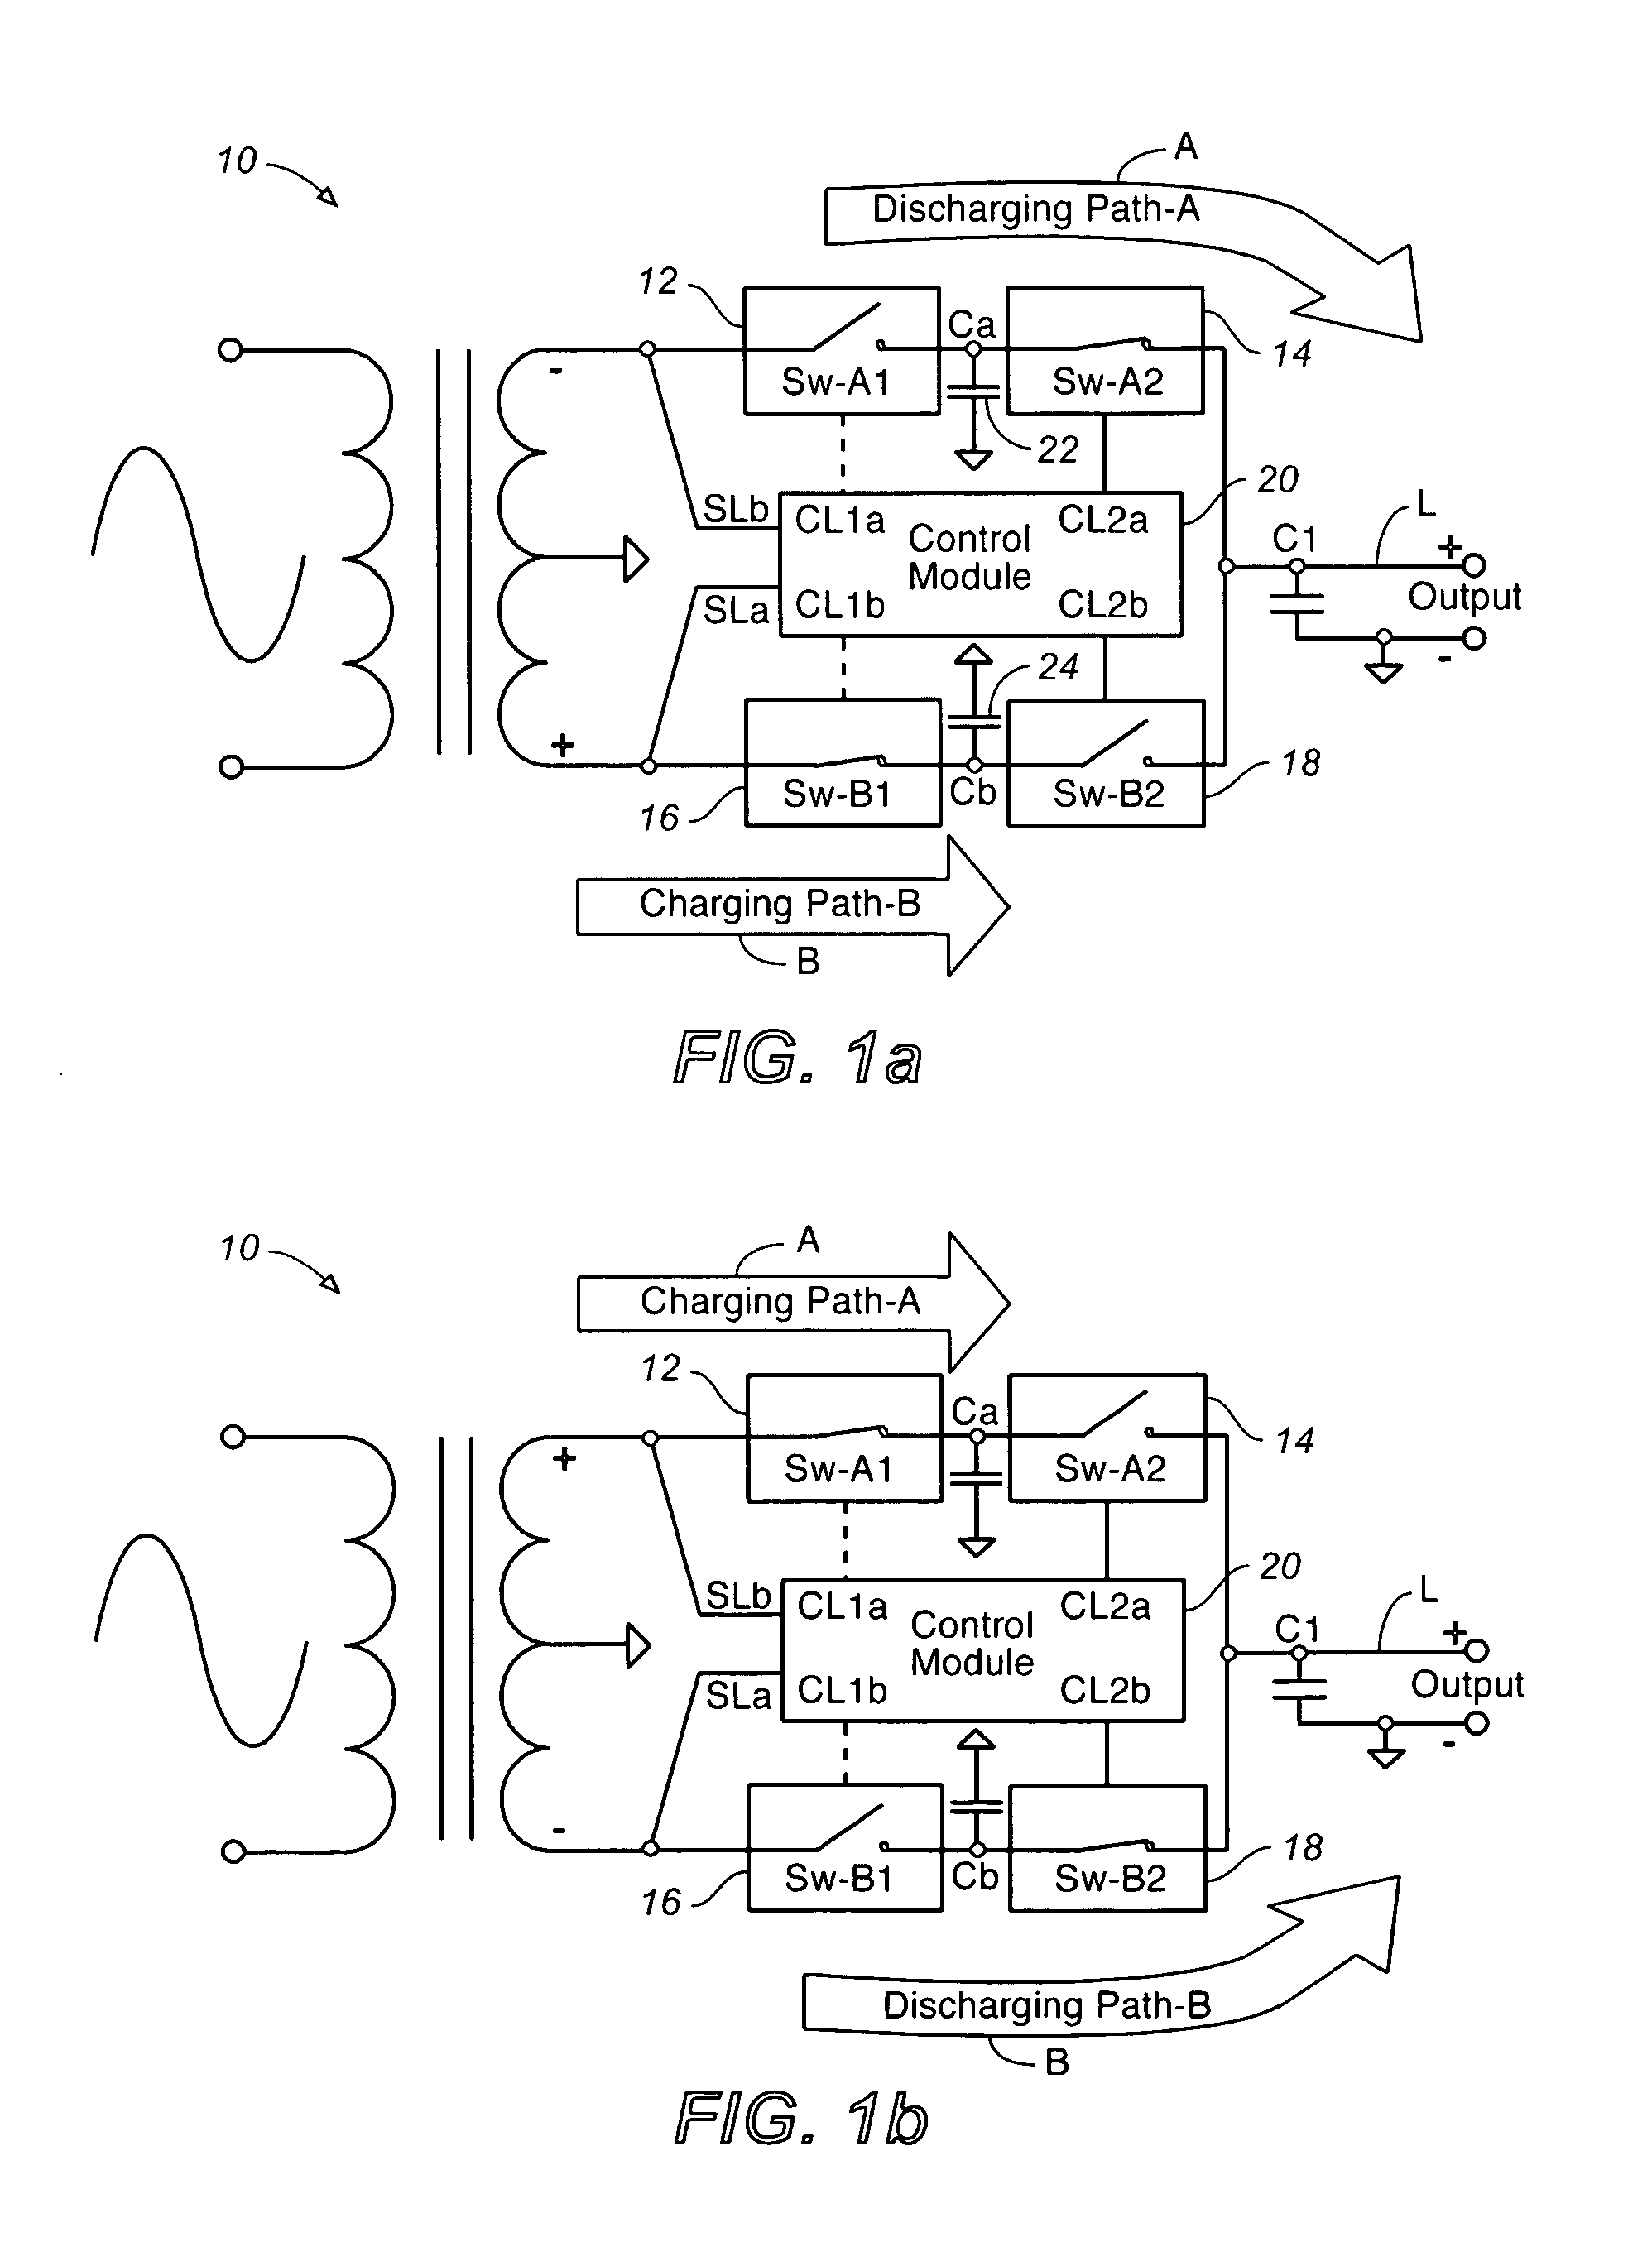 Method and apparatus for isolating RFI, EMI, and noise transients in power supply circuits